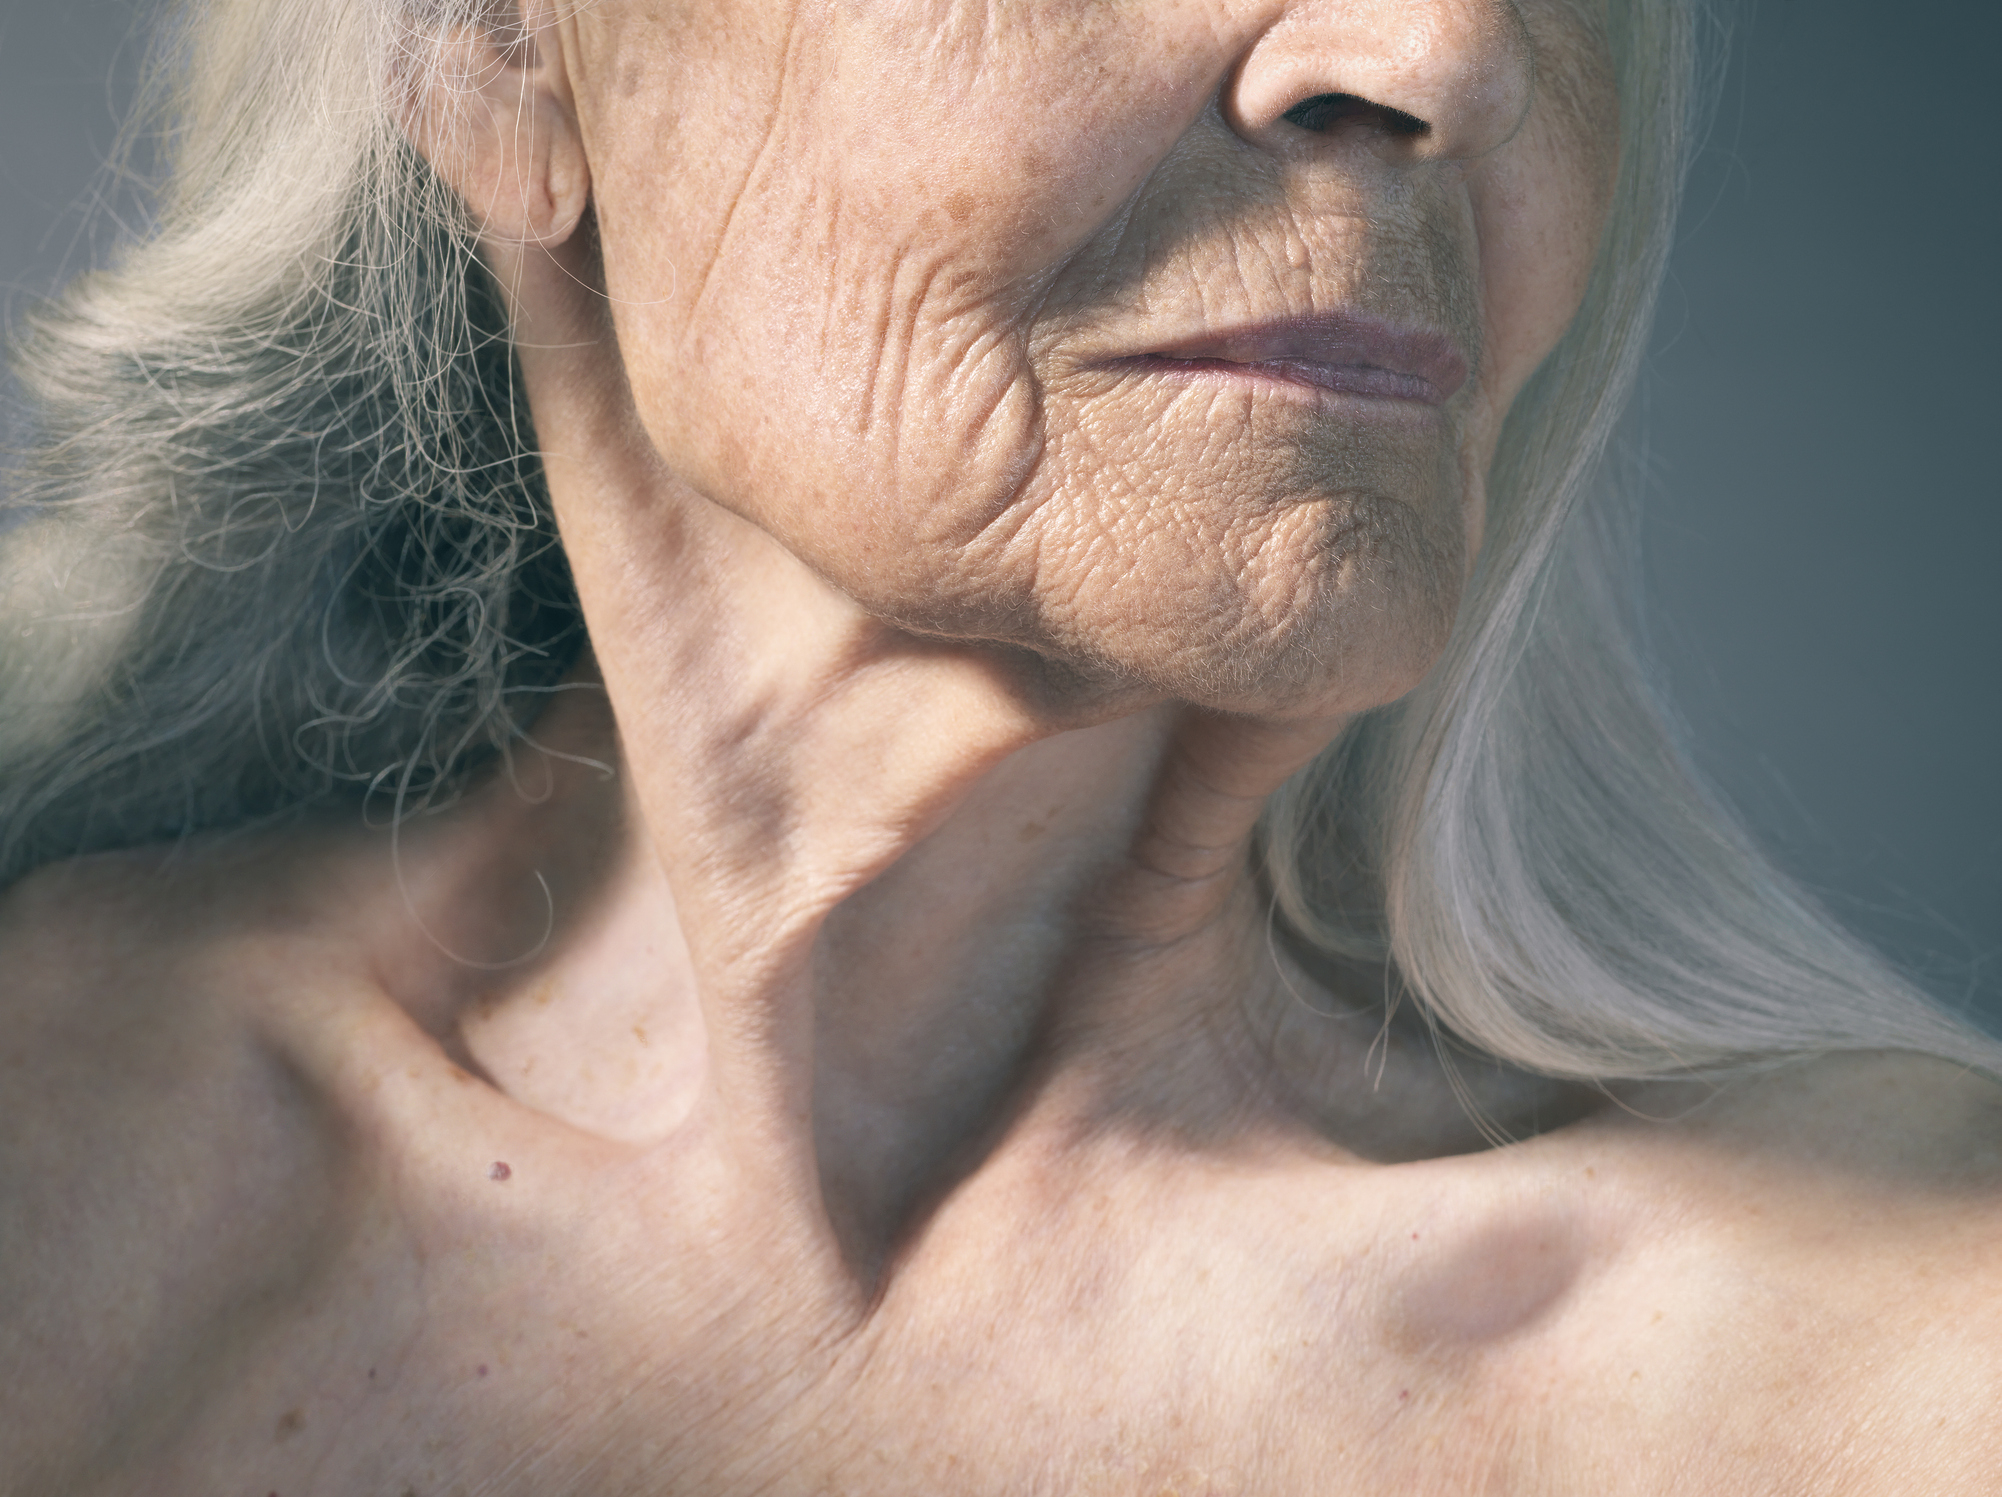 Close-up of an elderly person&#x27;s face and neck showing detailed skin texture and wrinkles, indicating aging. The person is looking slightly to the side